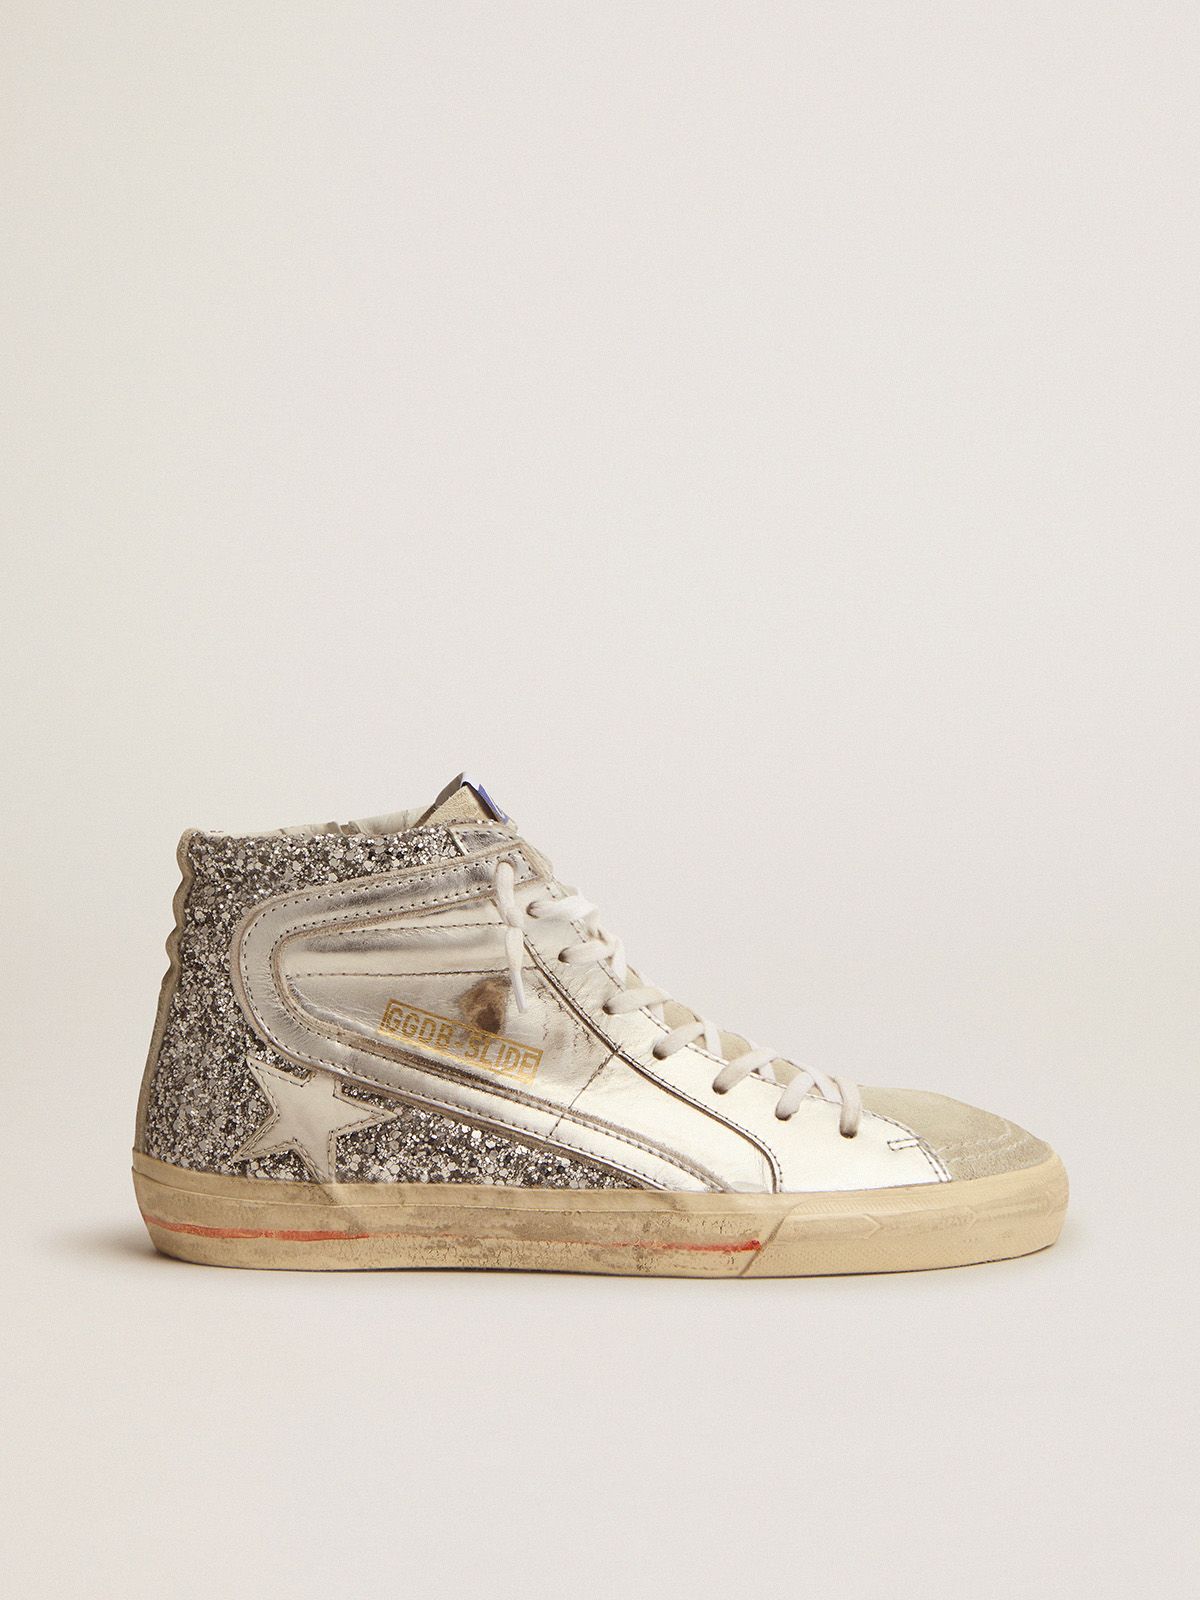 golden goose glitter and upper Slide in leather laminated sneakers silver with